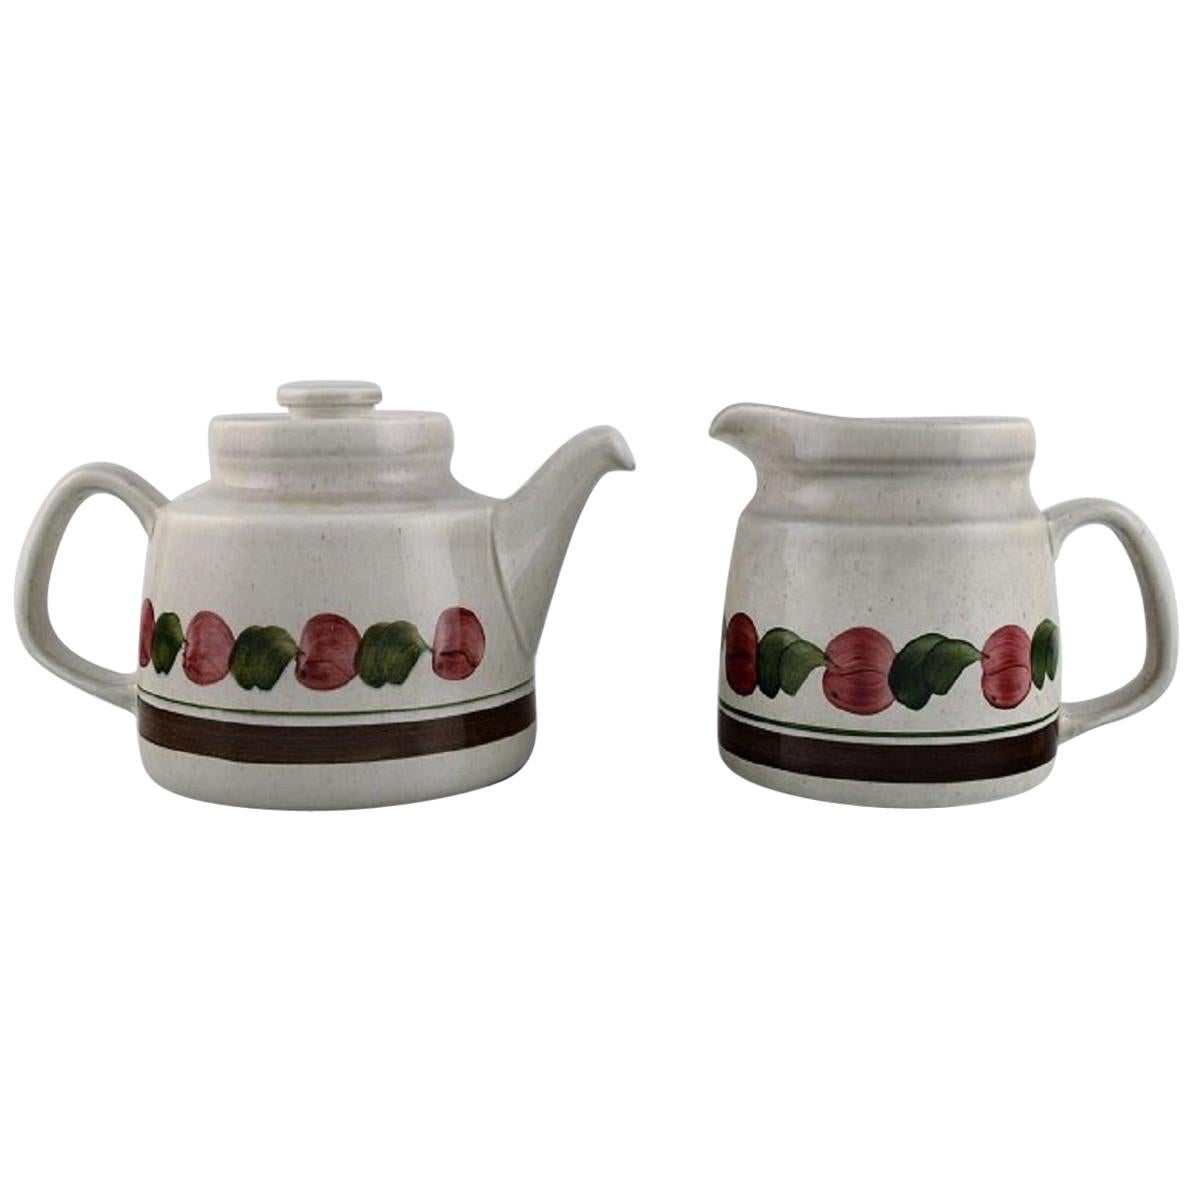 Jackie Lynd for Rörstrand, Birgitta Teapot and Milk Jug in Stoneware, 1970s For Sale